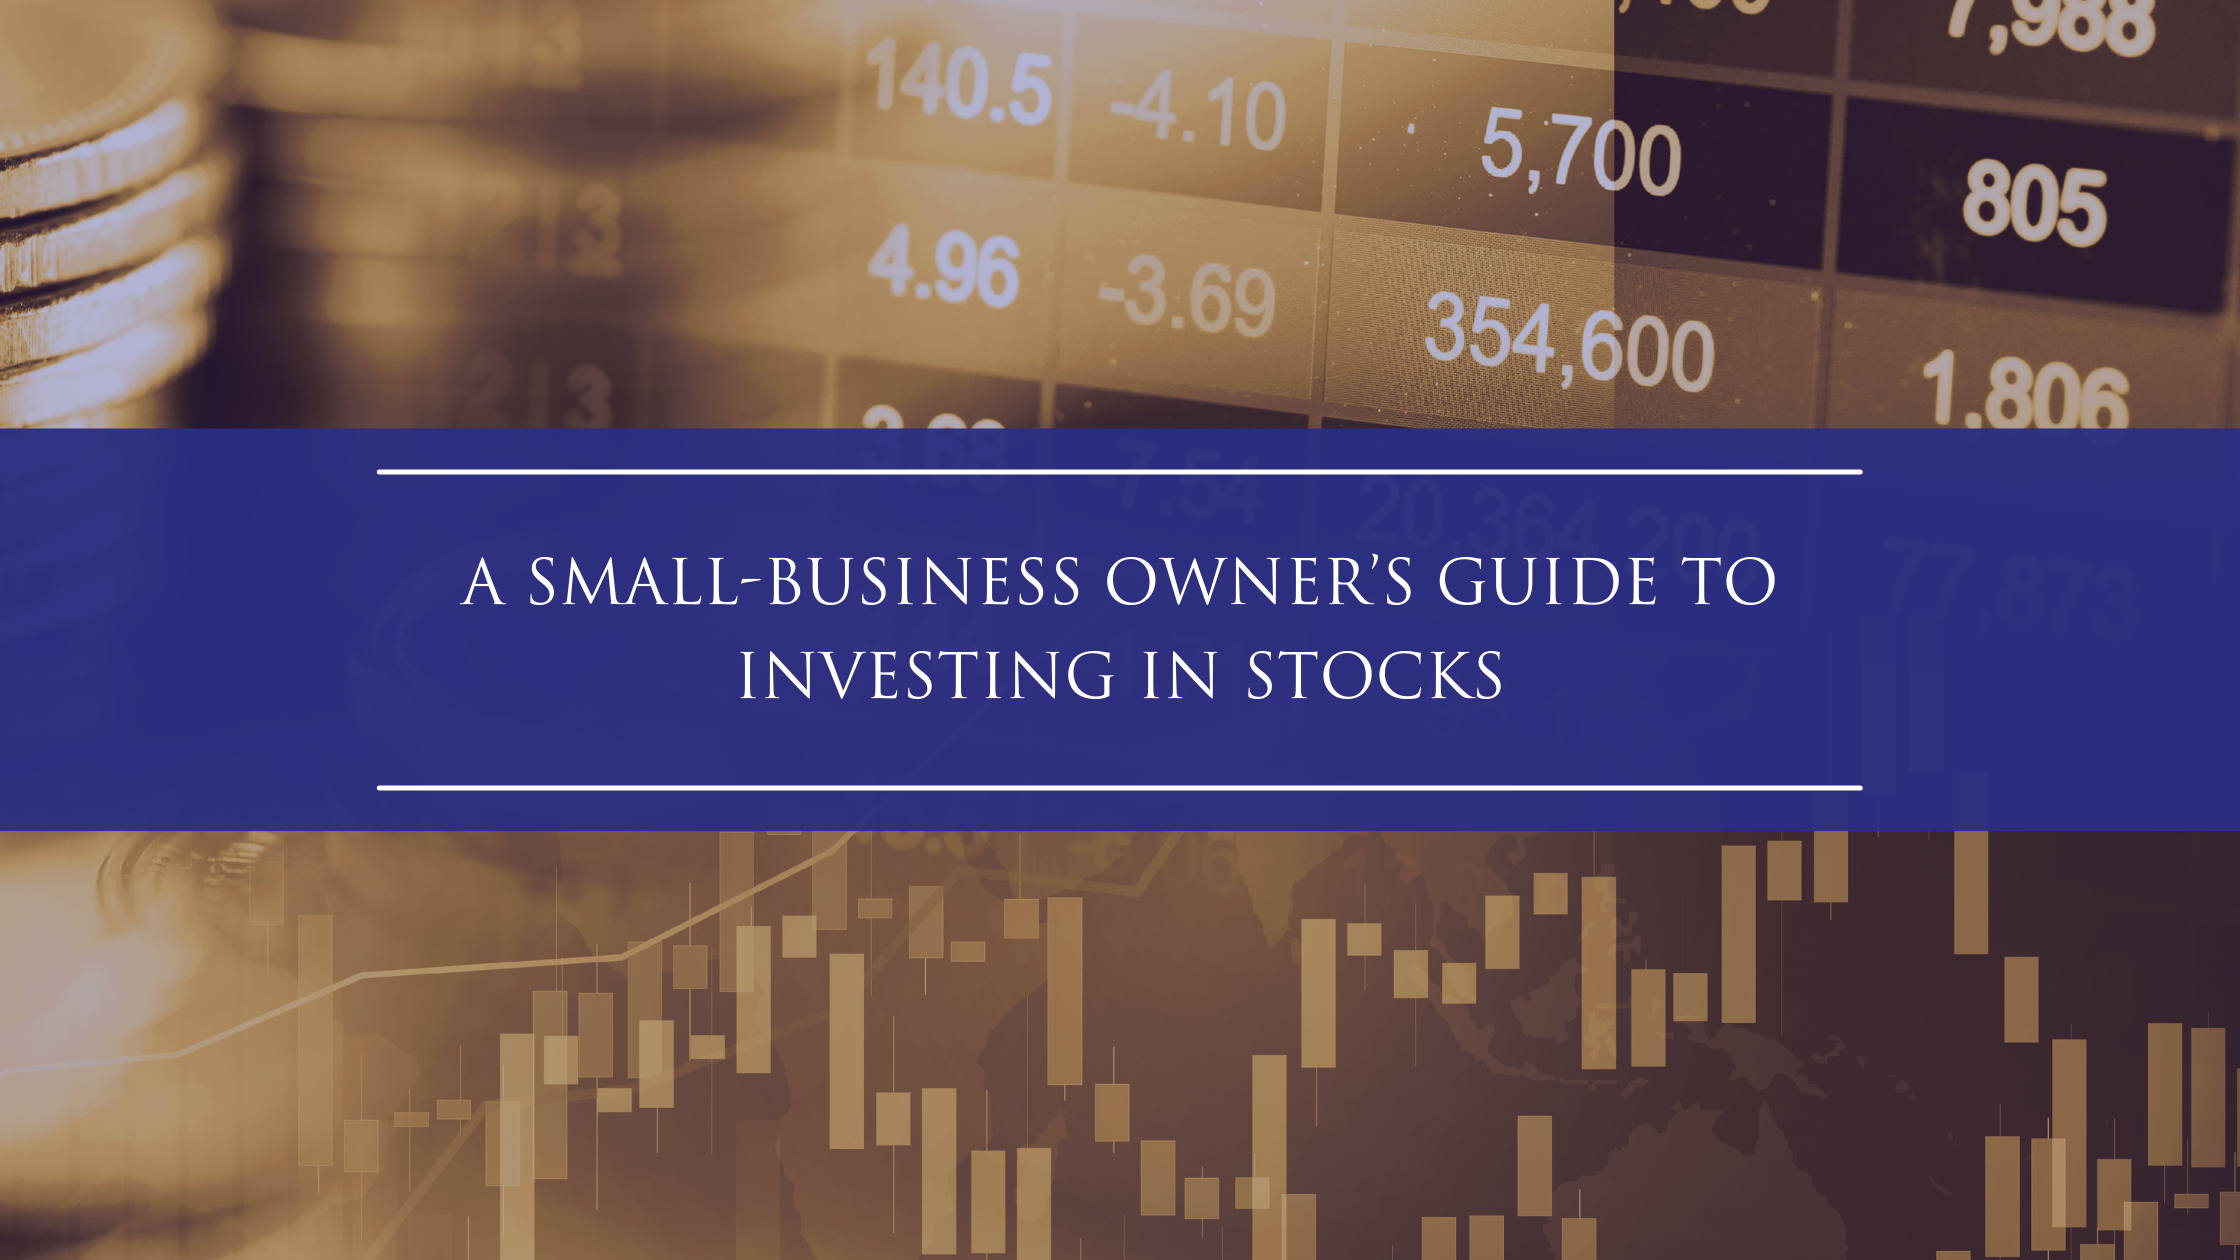 A Small-Business Owner’s Guide To Investing in Stocks